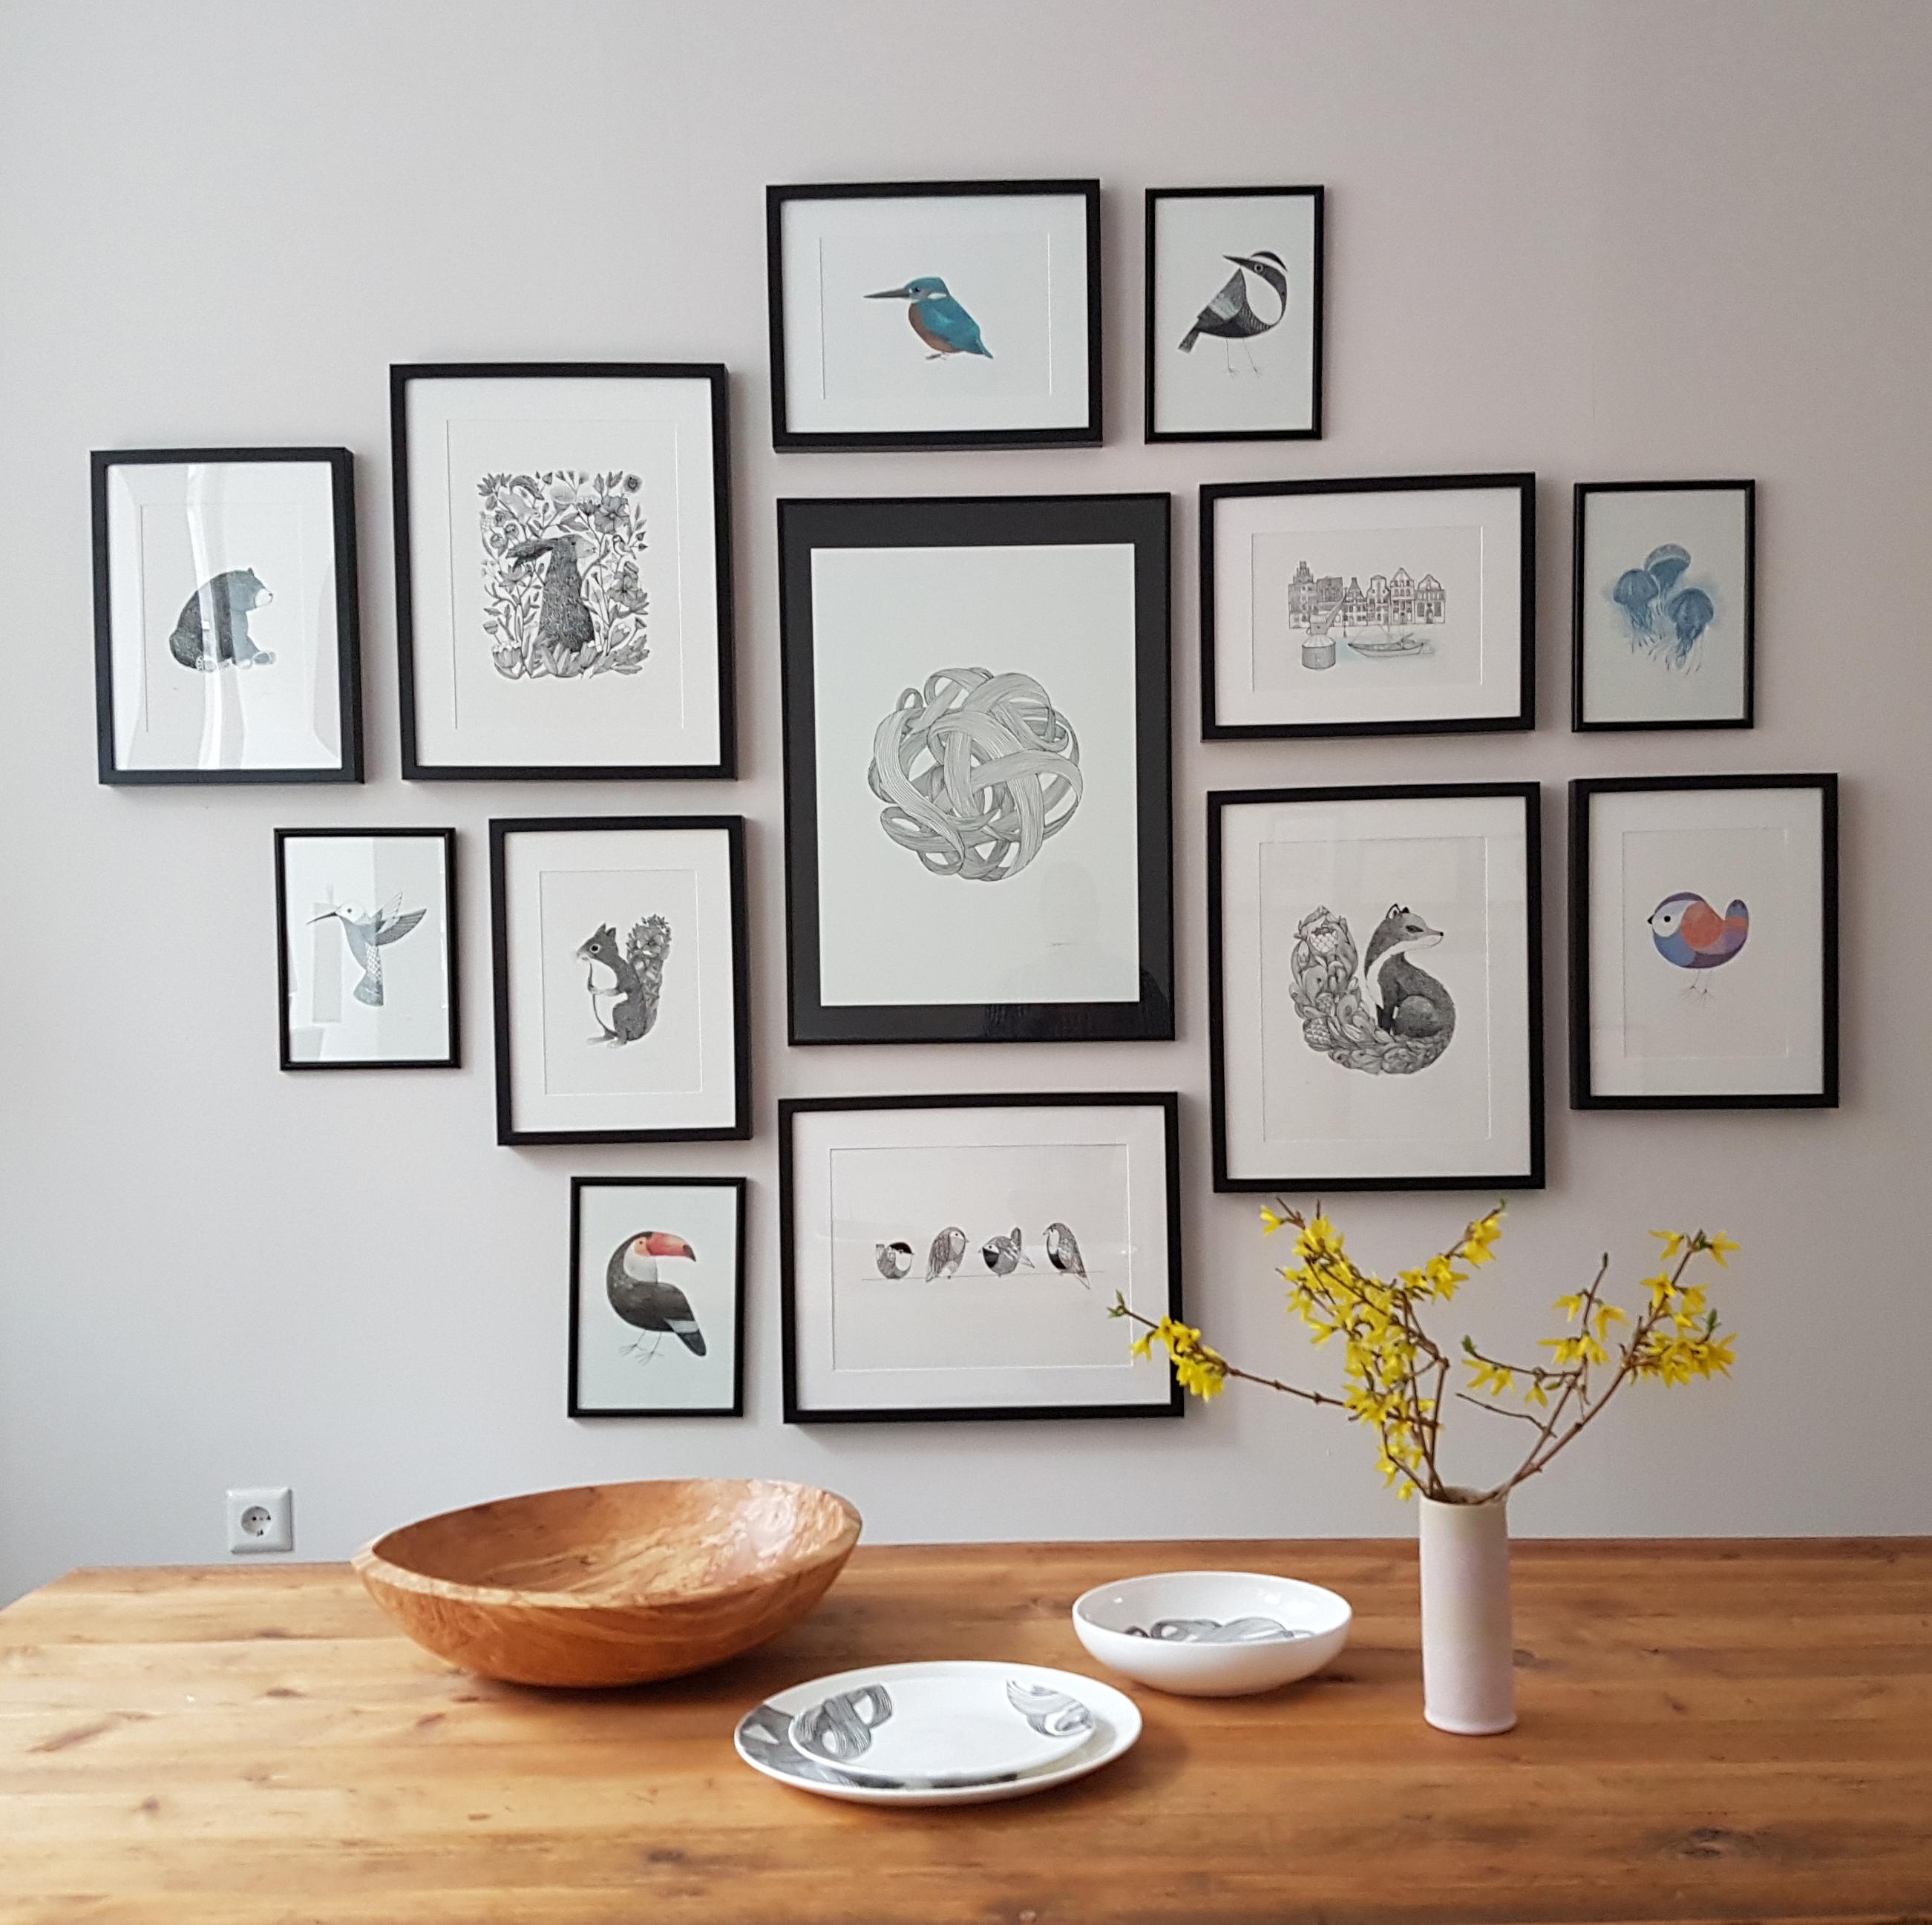 A wall in my shop. If in Lüneburg, stop on by! #stilllife #prints #Frame #gallerywall #prints